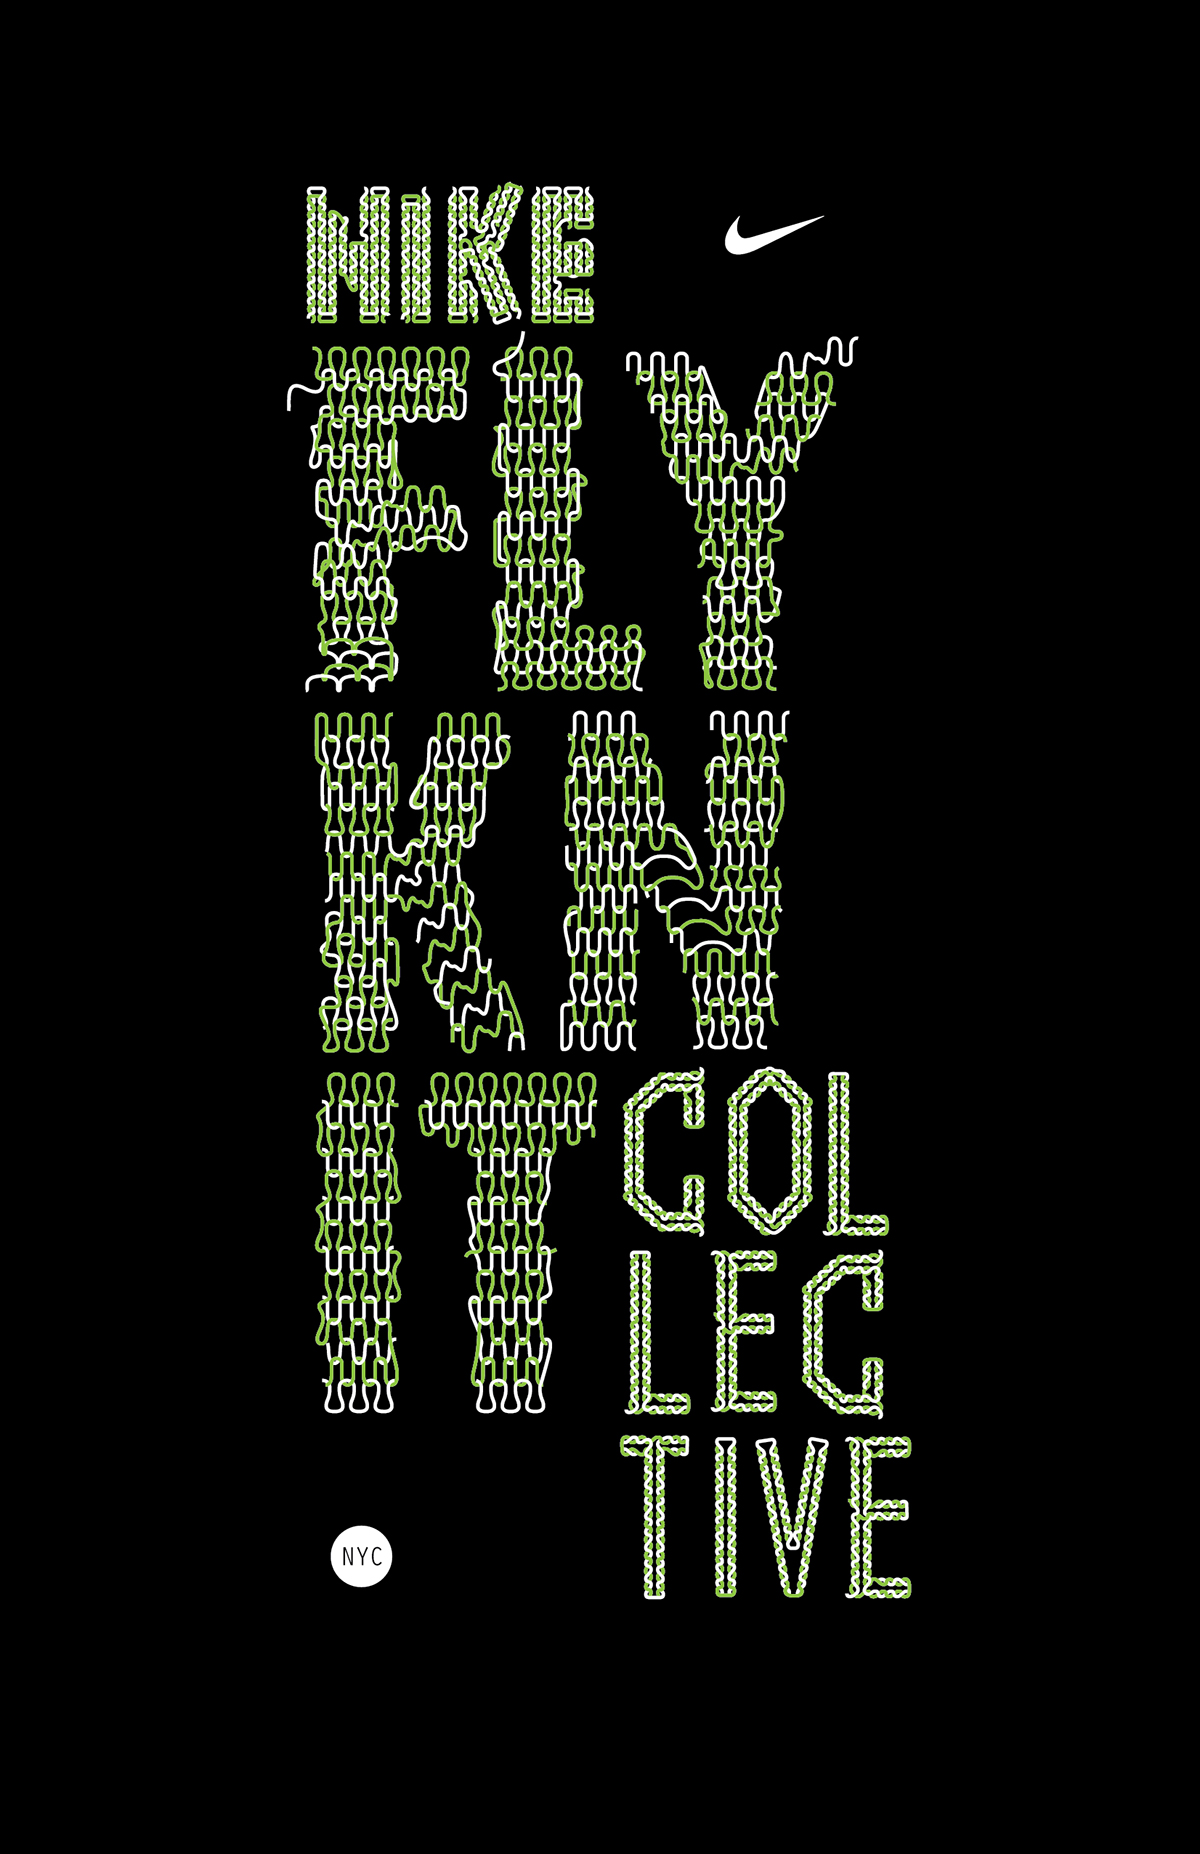 Nike Flyknit Collective T-shirt 3 on 